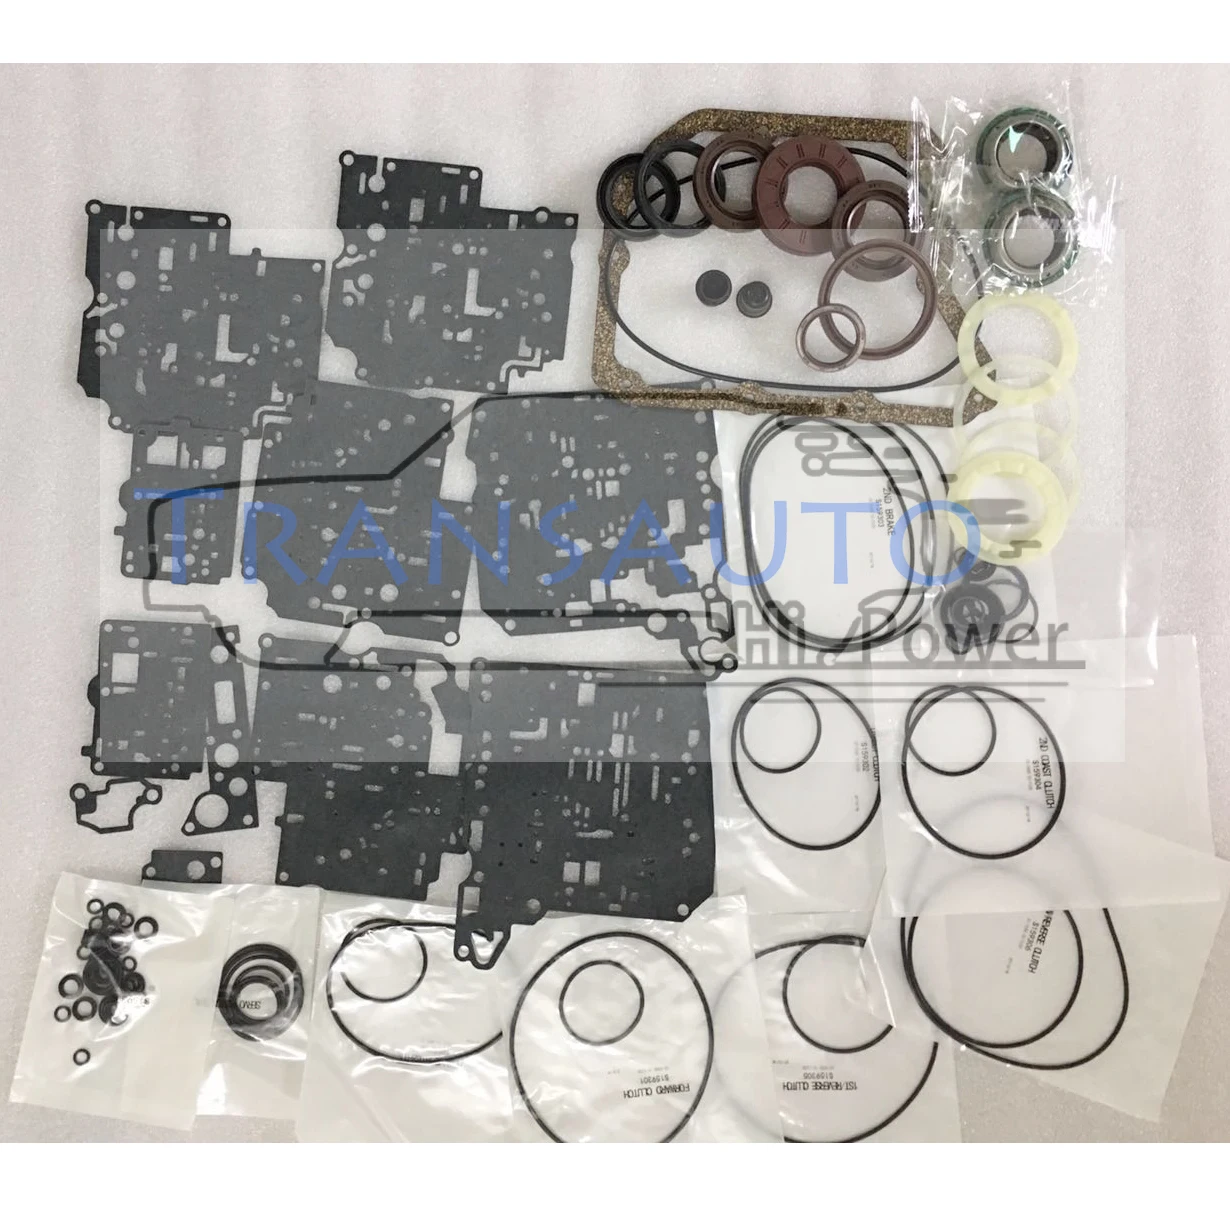 AW55-50SN AW55-51SN AF33, RE5F22A Transmission Overhaul kit For Volvo Saab  Opel Chevrolet Gearbox Clutch Repair Kit Seal Gasket AliExpress